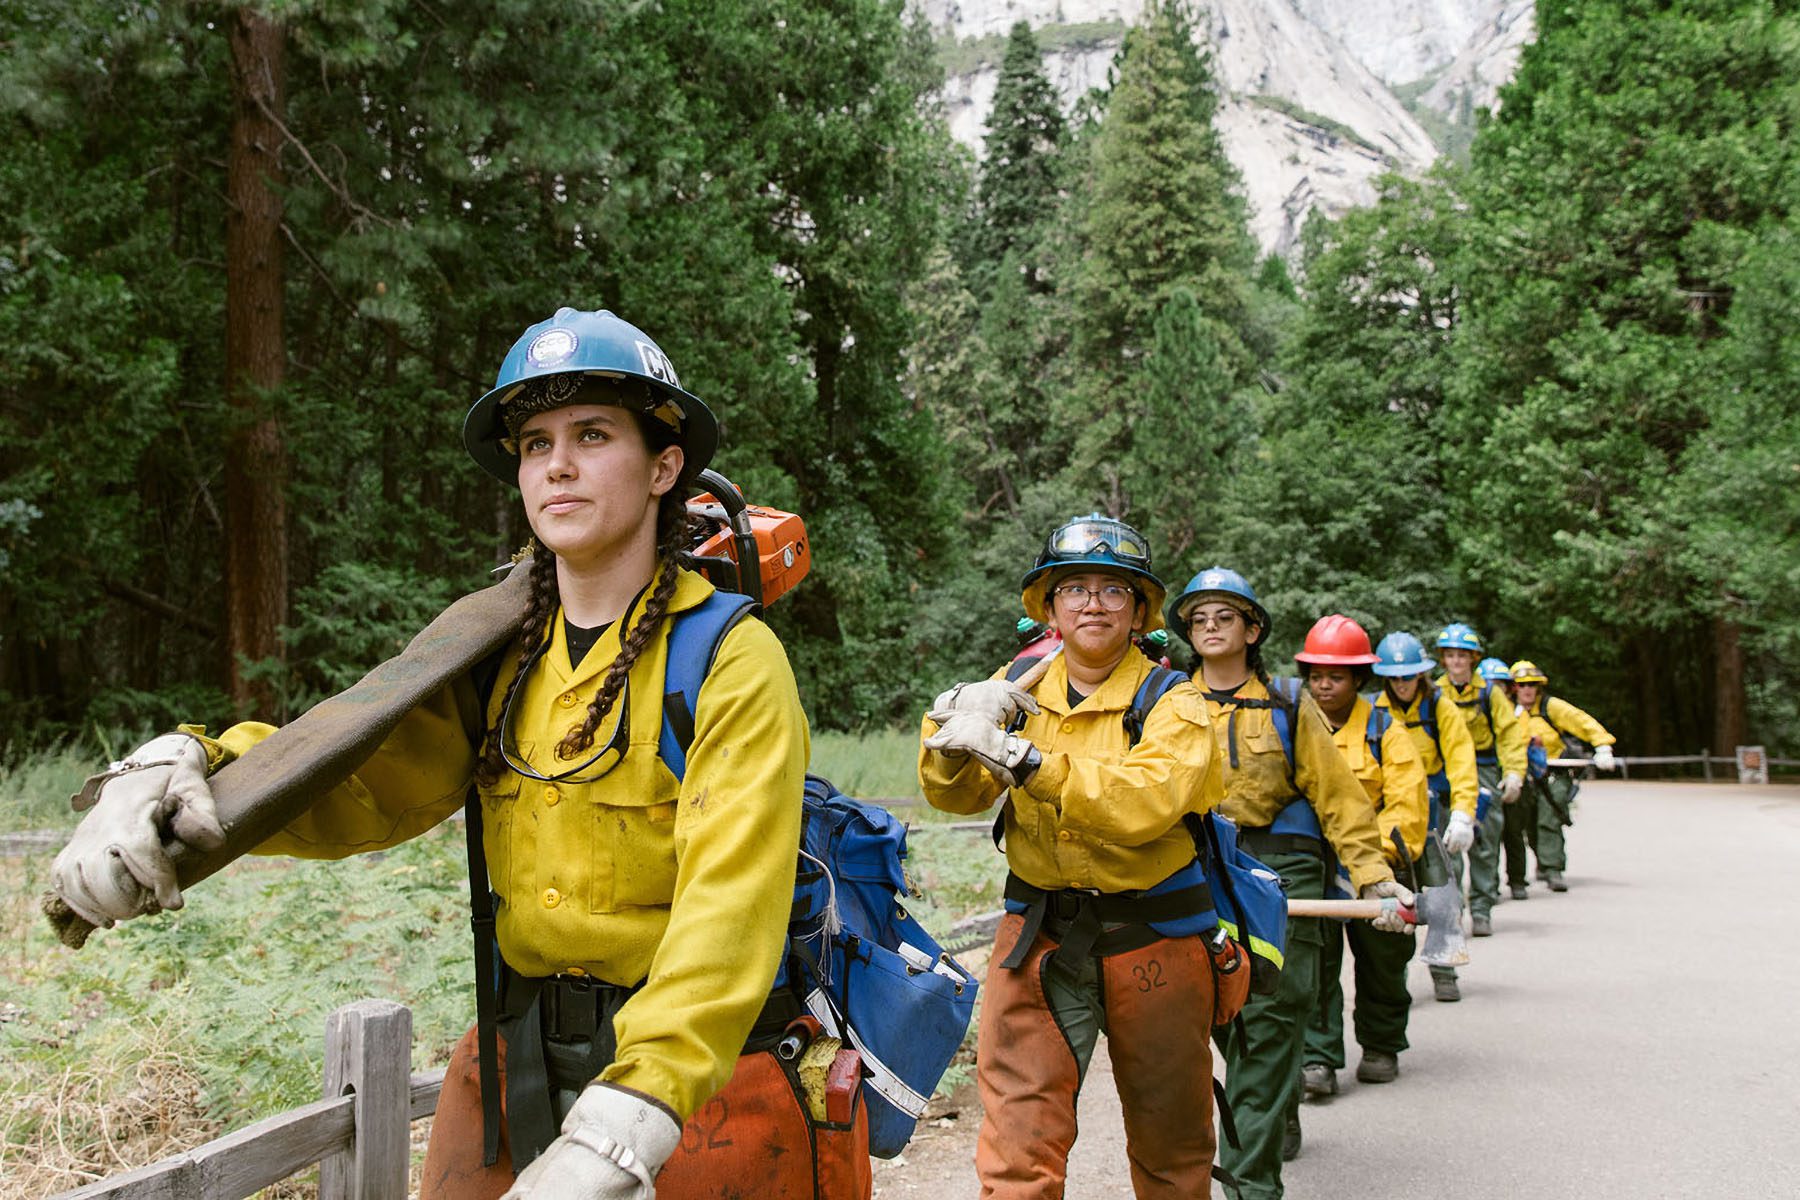 The National Park Service Wants To Bring More Women Into Wildland Firefighting